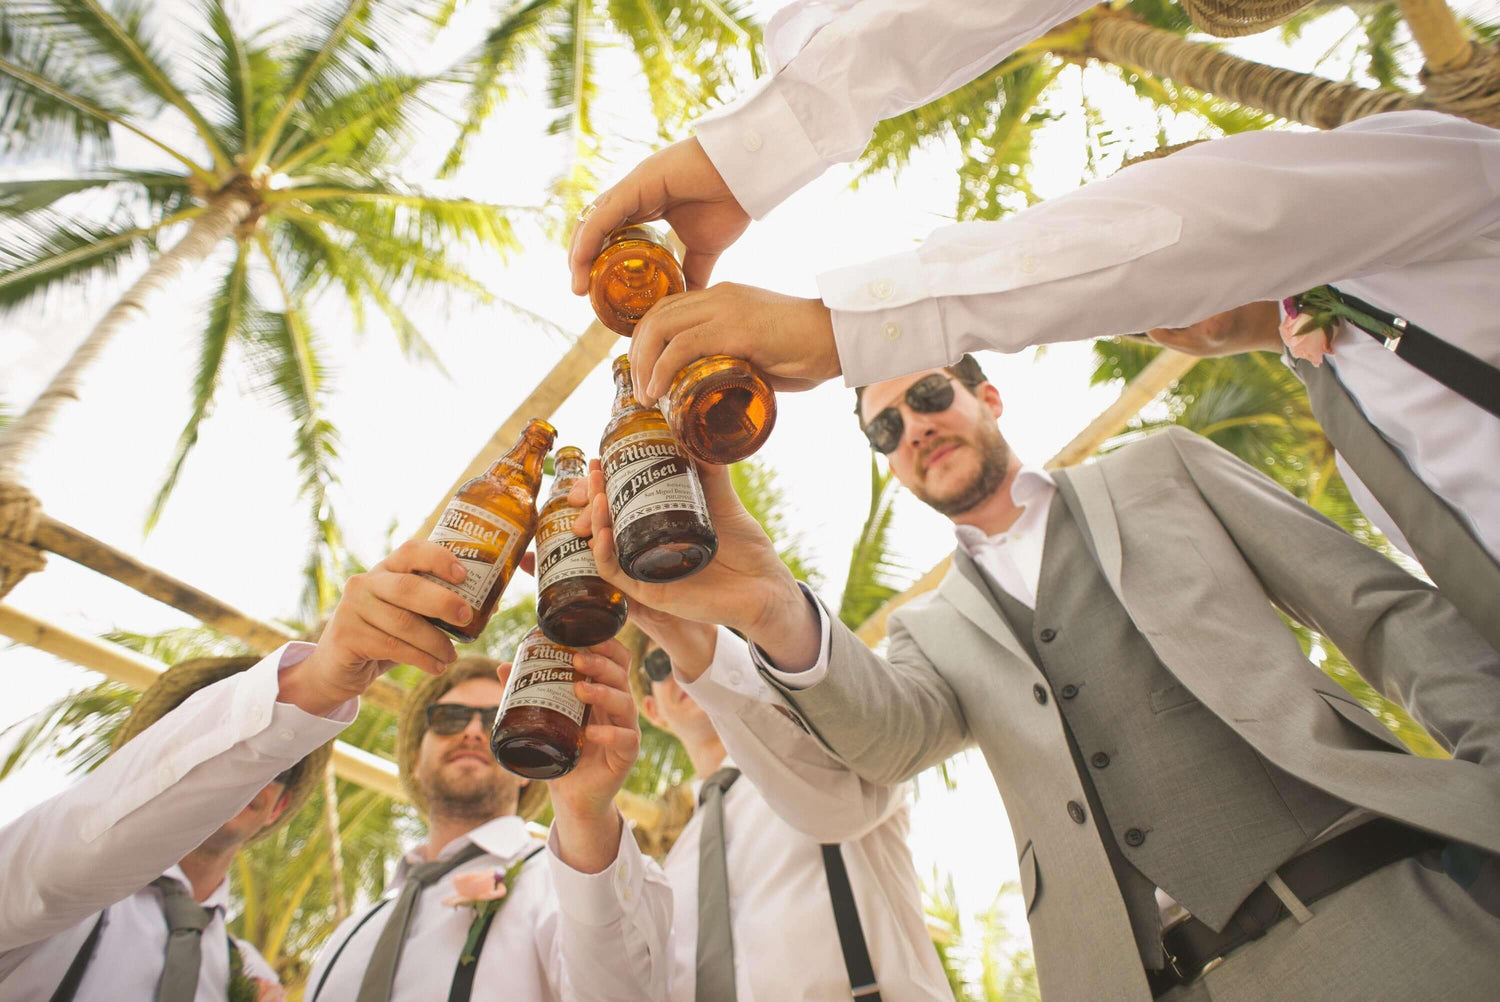 The 5 Best Wedding Gifts From the Best Man to the Groom